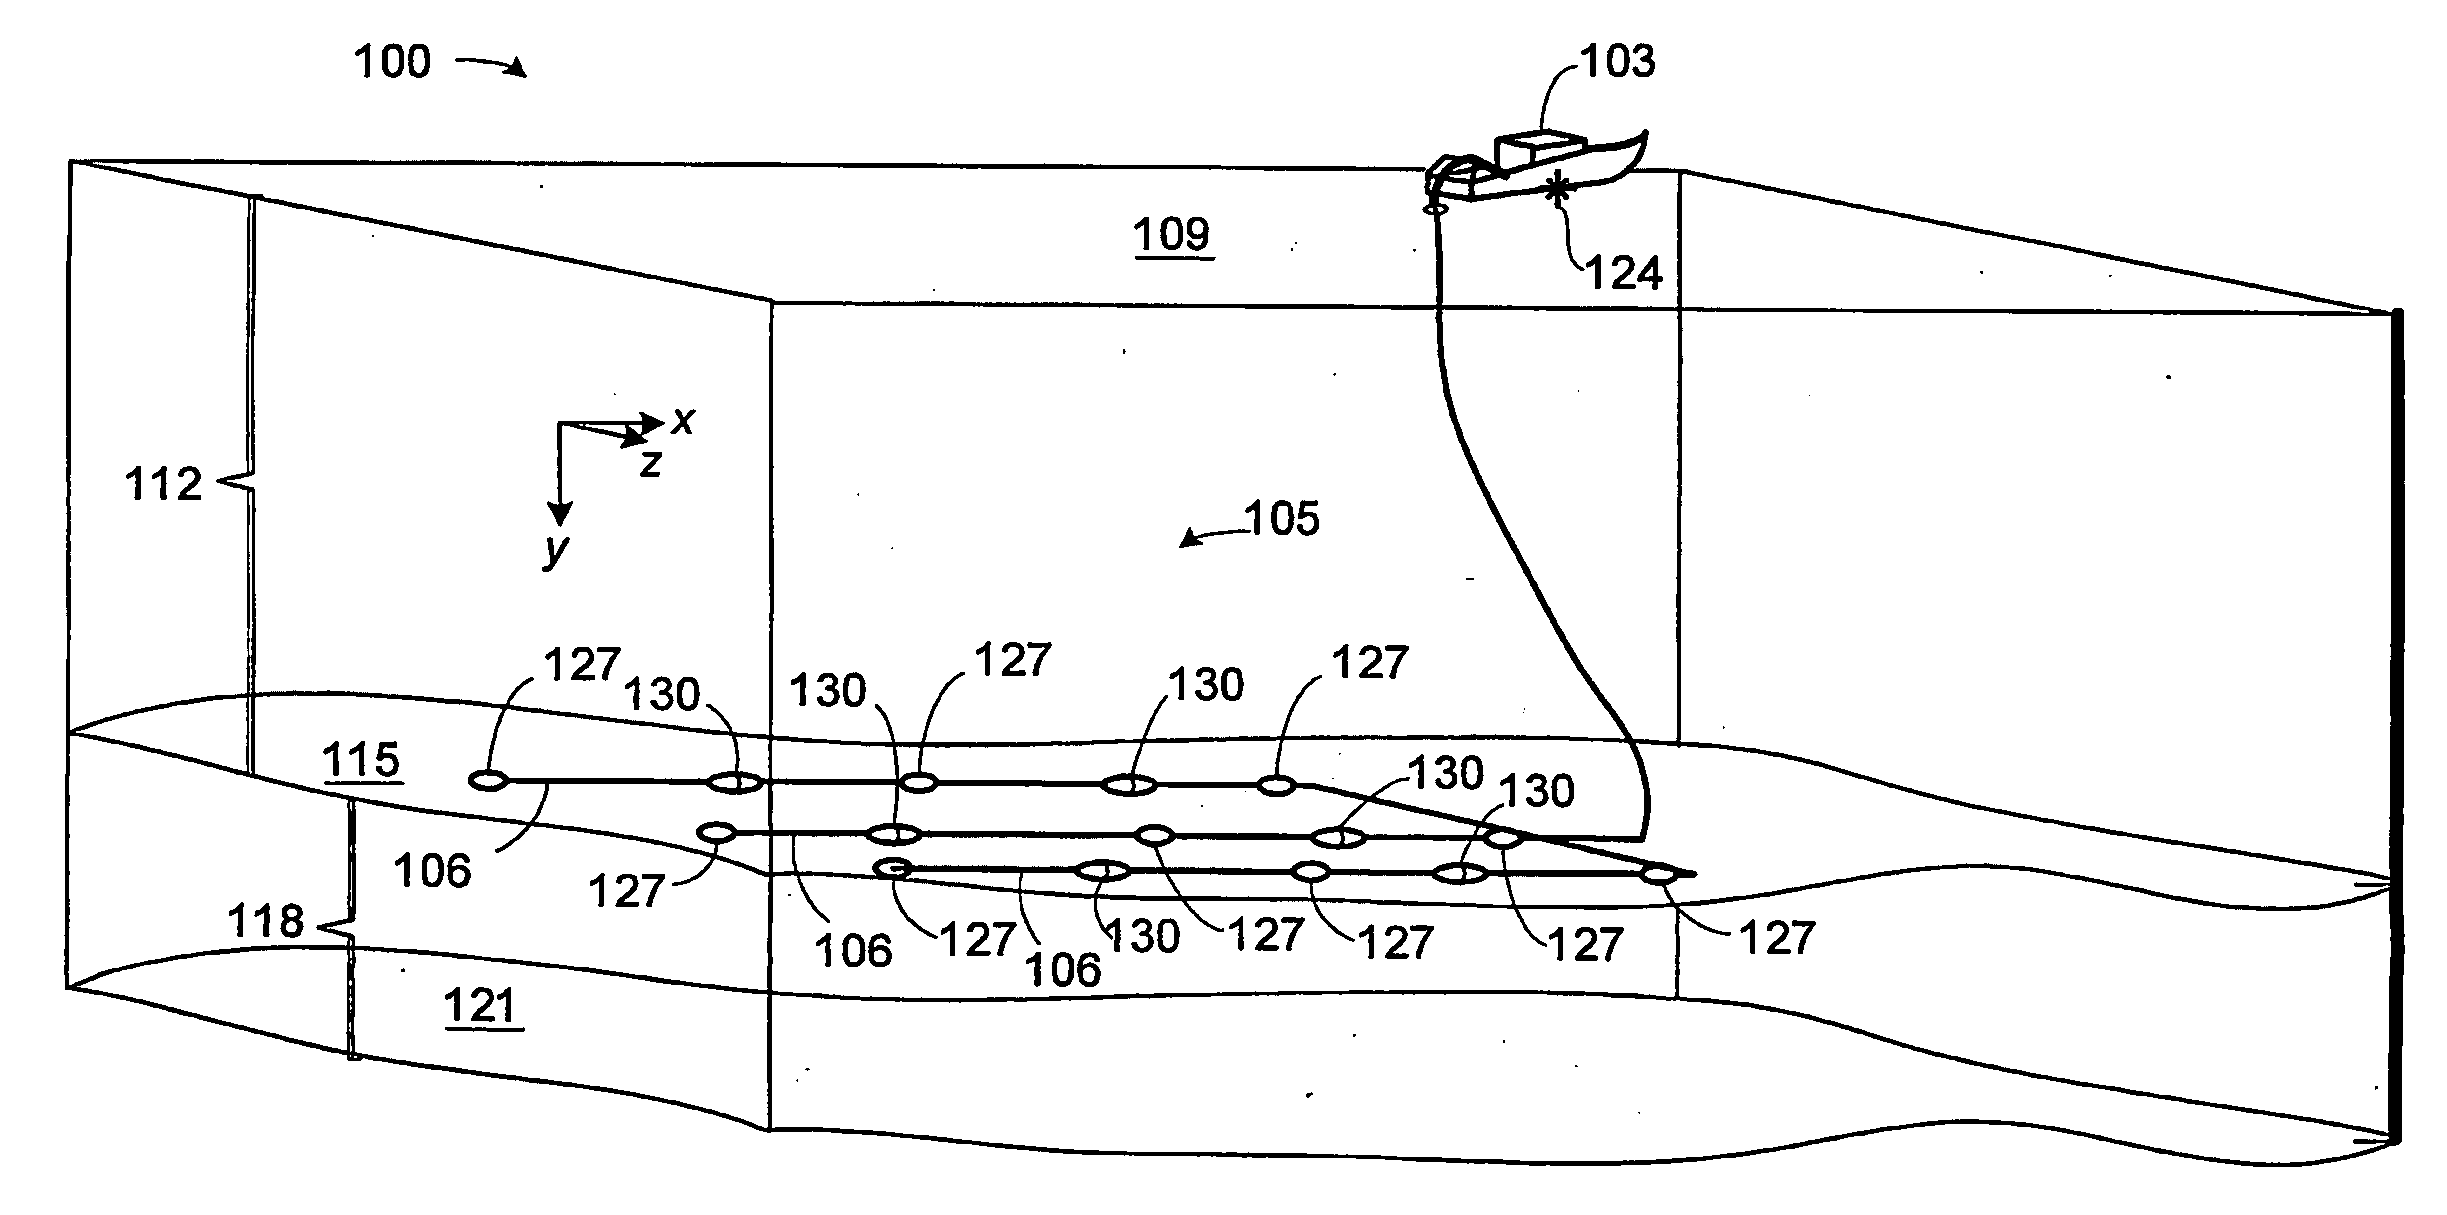 Seismic Cable Positioning Using Coupled Inertial System Units